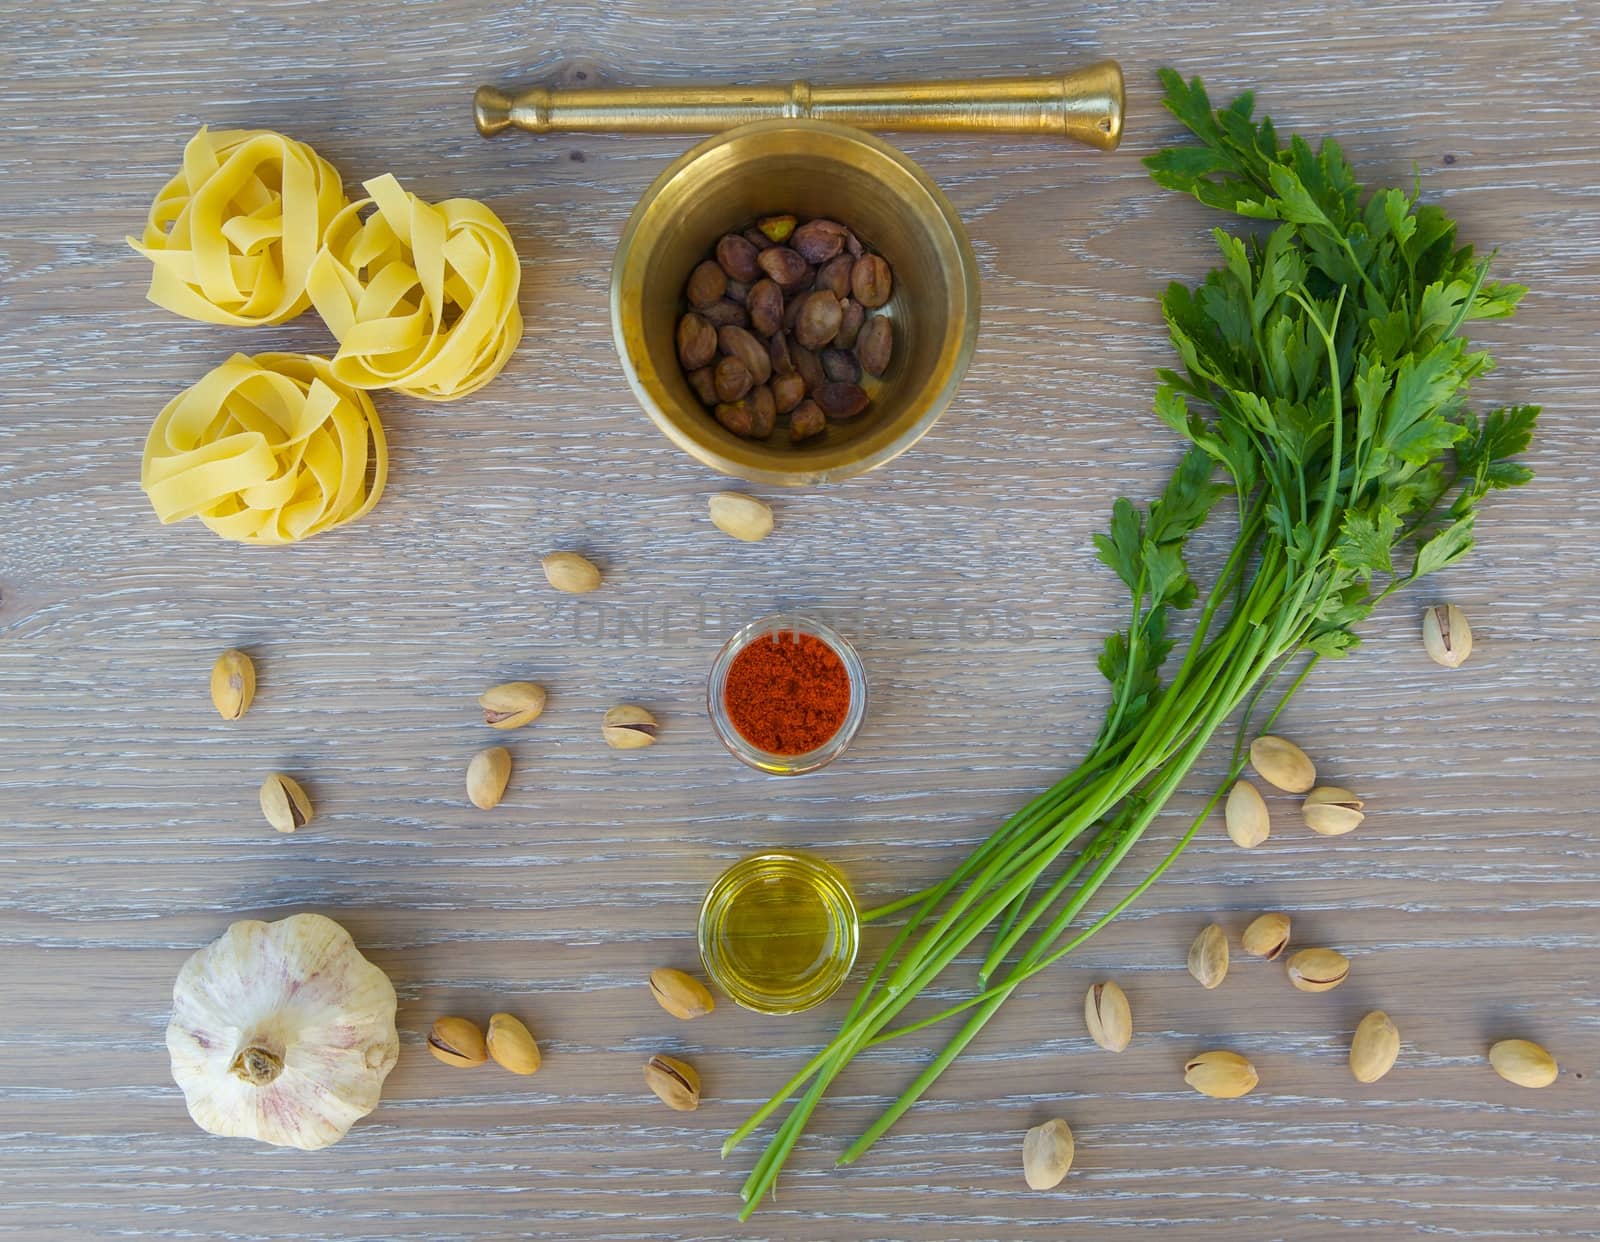 Ingredients for preparing pasta with pistachio pesto on a wooden surface. Top view. Background